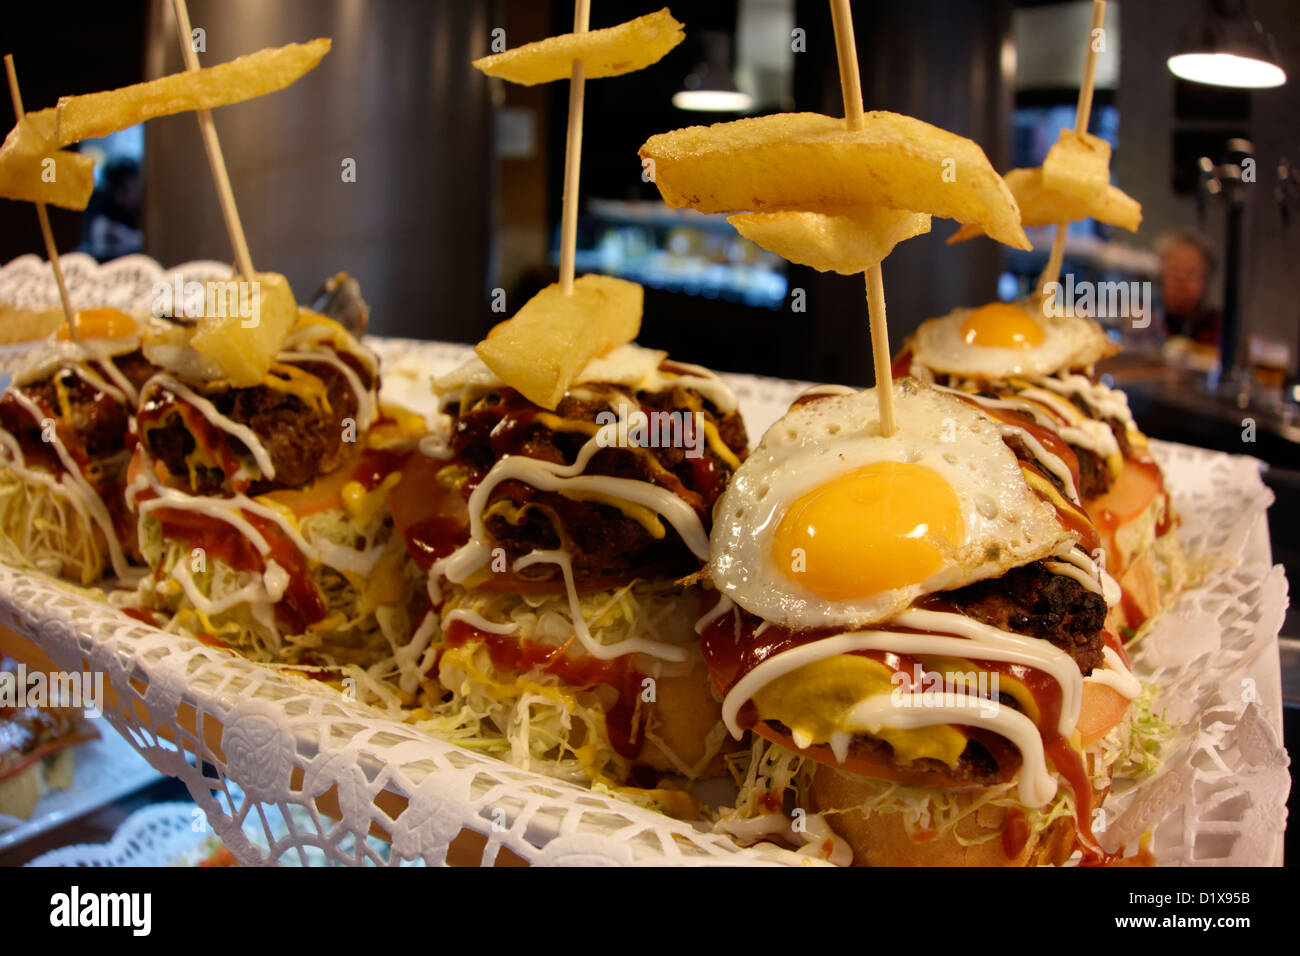 madrid spain arts and letters menu restaurant typical hamburger egg fries french Stock Photo - Alamy